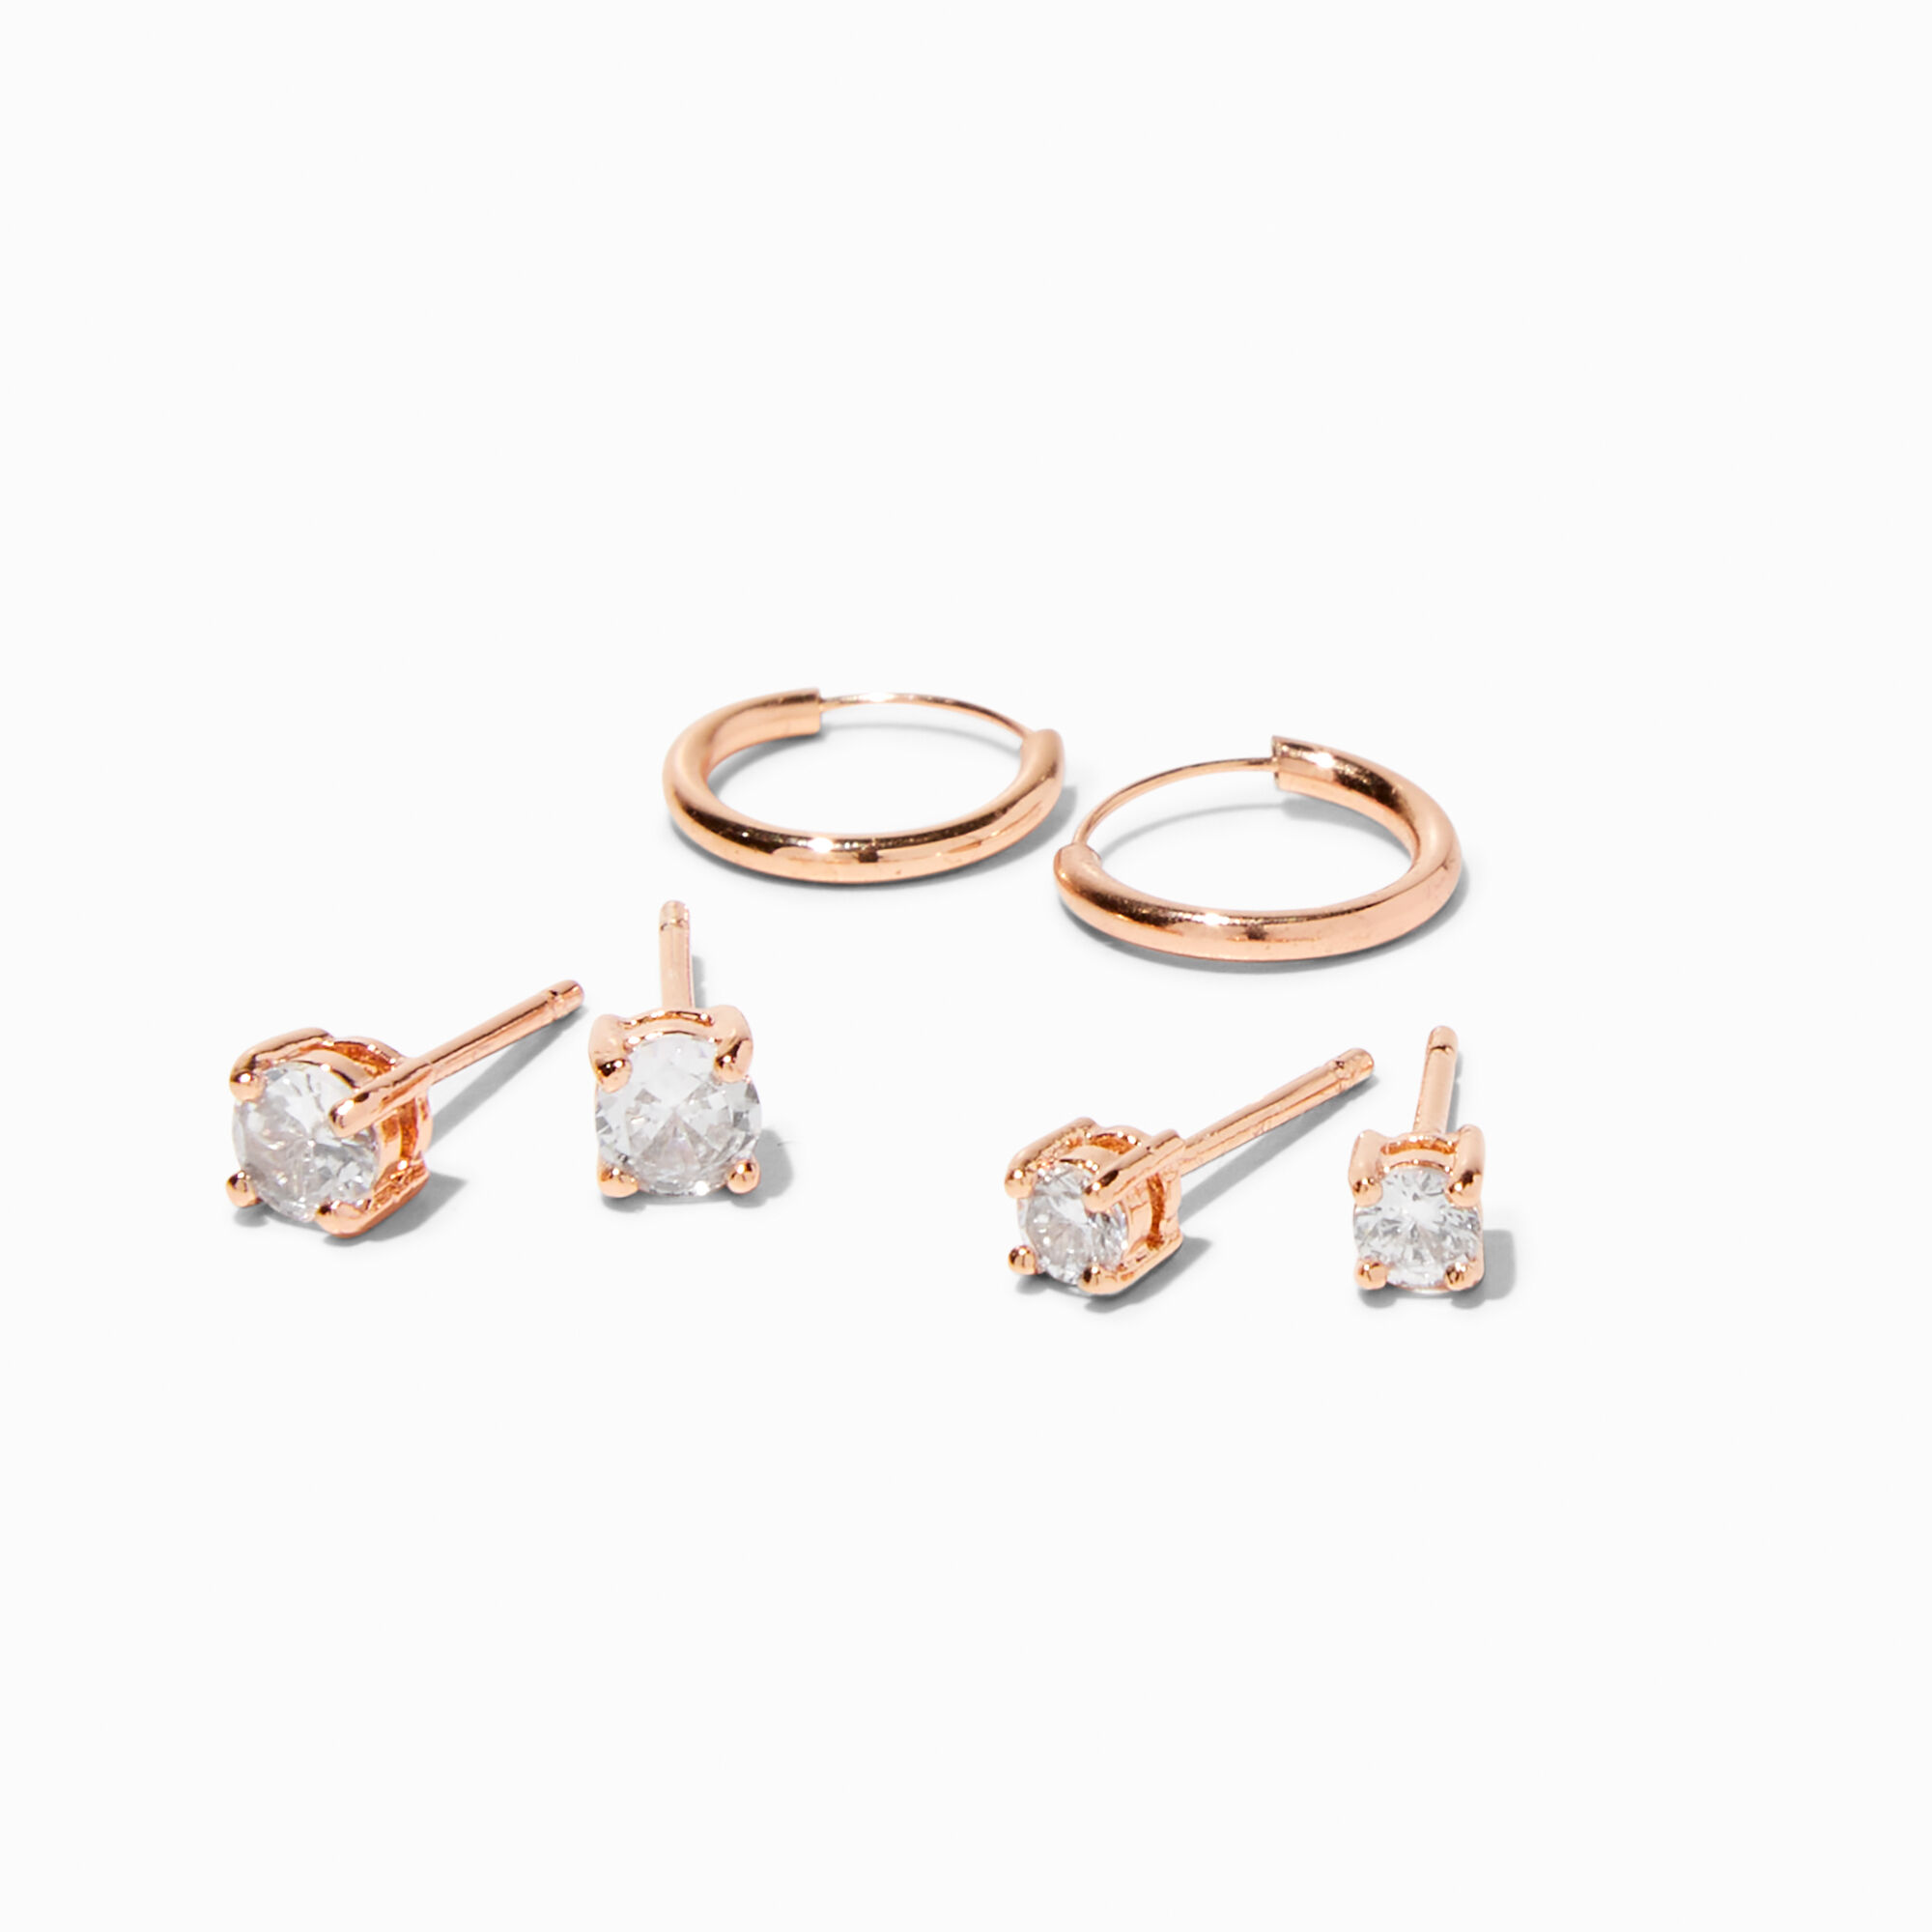 View Claires 18K Rose Plated Cubic Zirconia Stud Hoop Earring Set 3 Pack Gold information